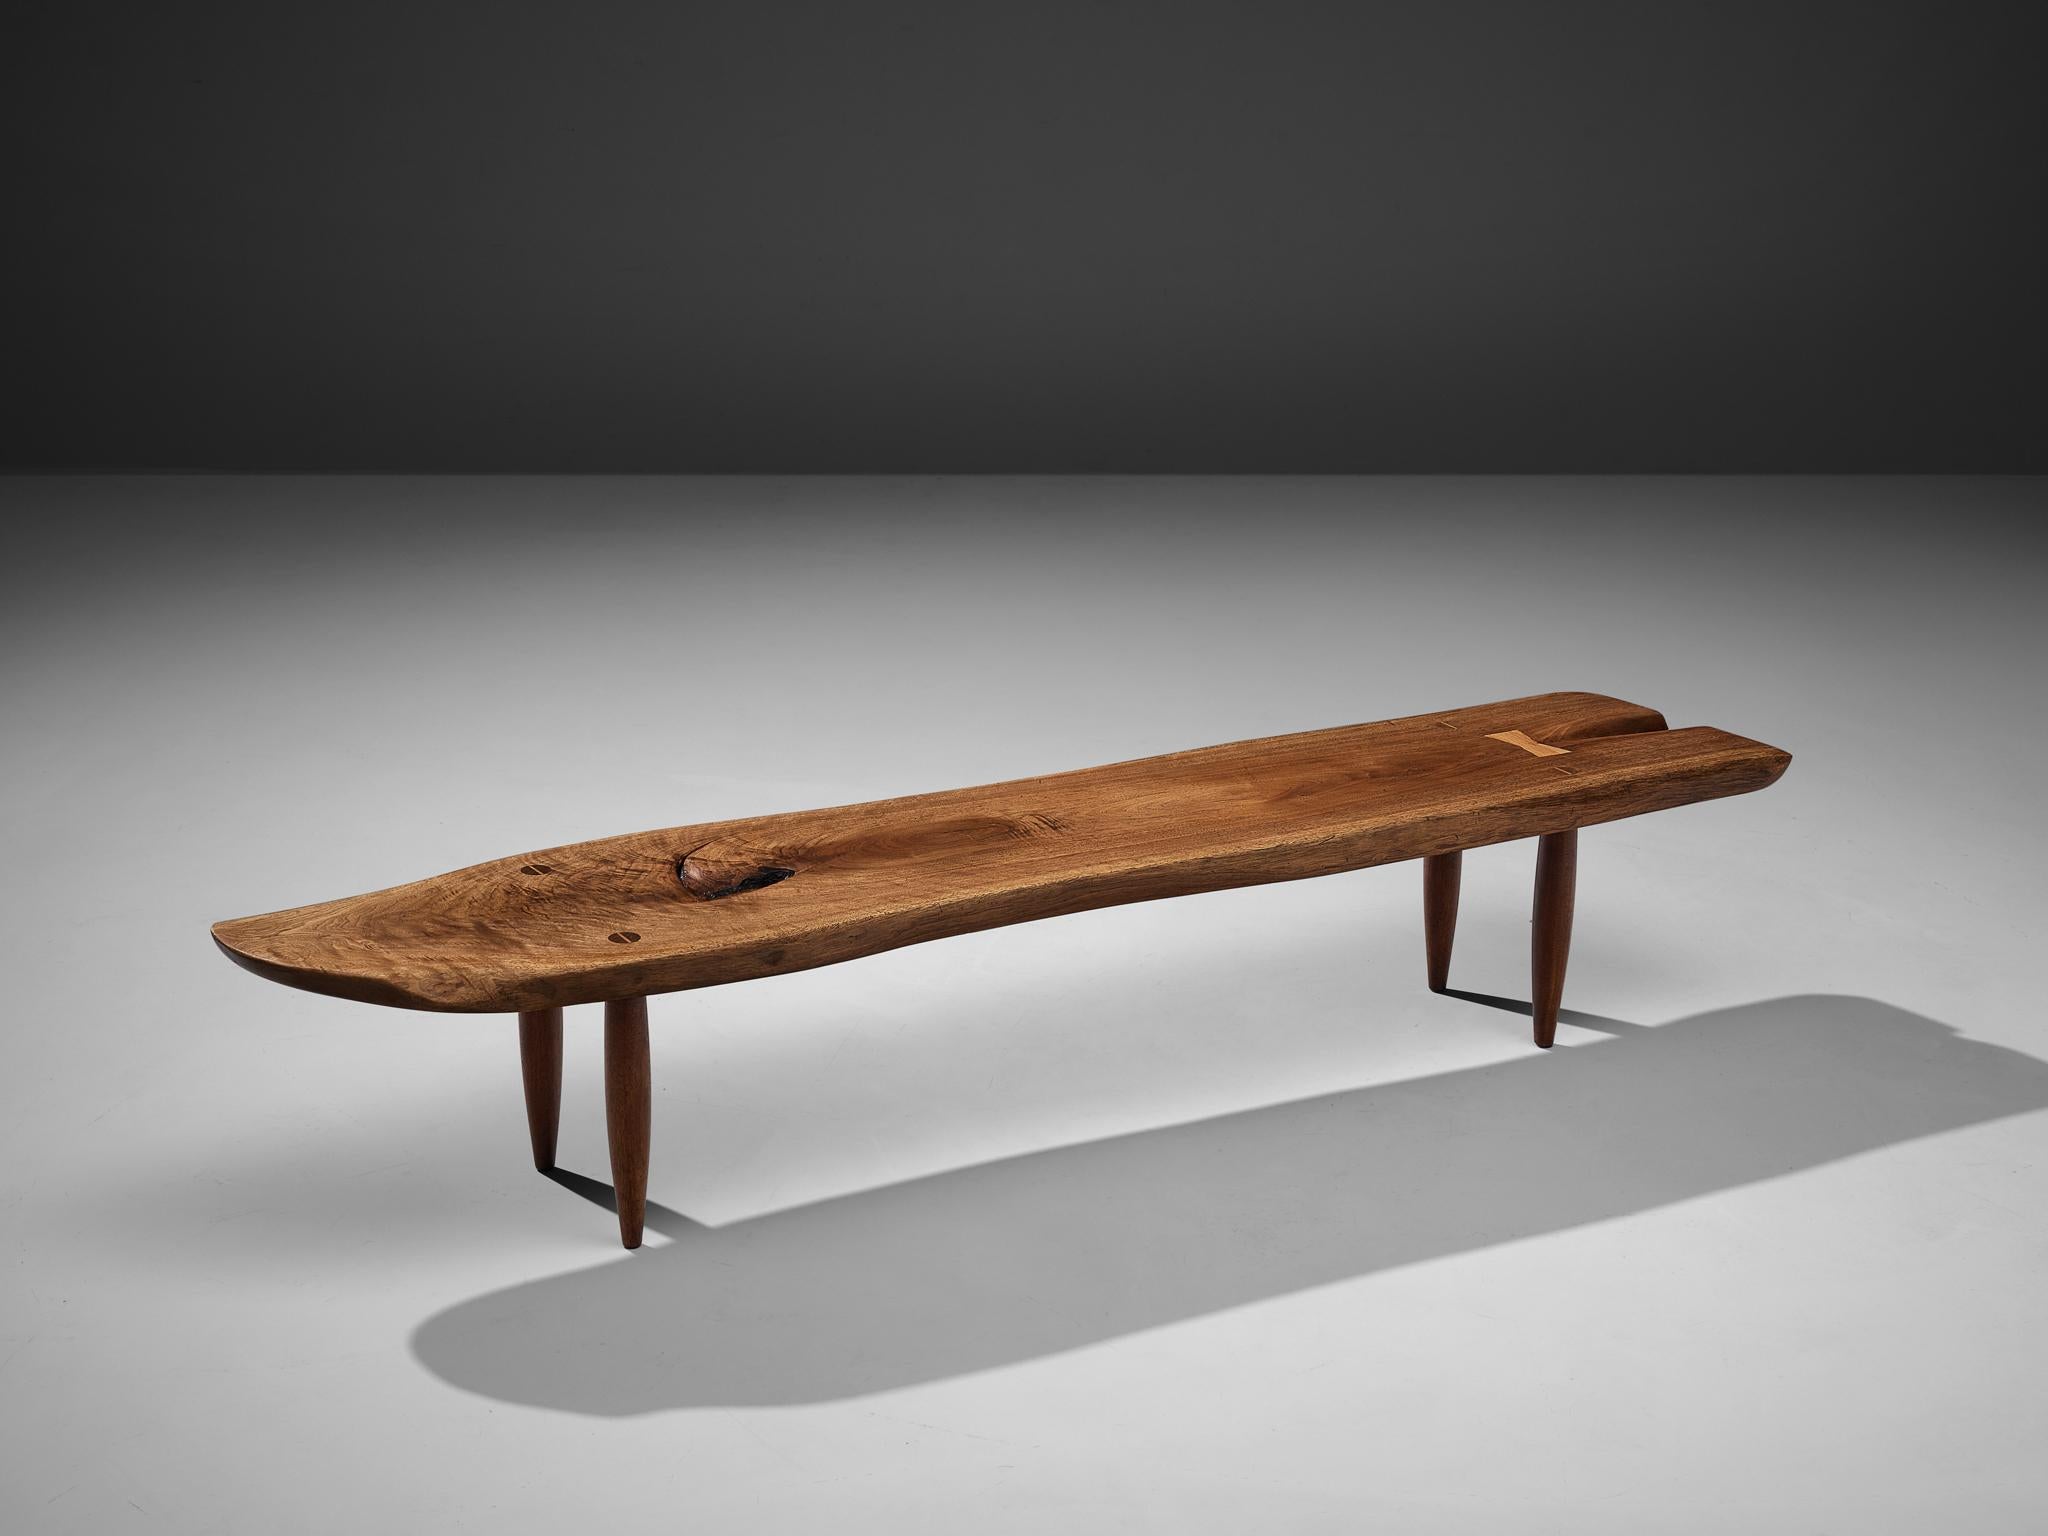 Phillip Lloyd Powell, coffee table, walnut, United States, 1960s

Stunning coffee table with free edges by US designer Phillip Lloyd Powell. On four circular tapered legs Powell places a long tabletop that follows the characteristics of the natural